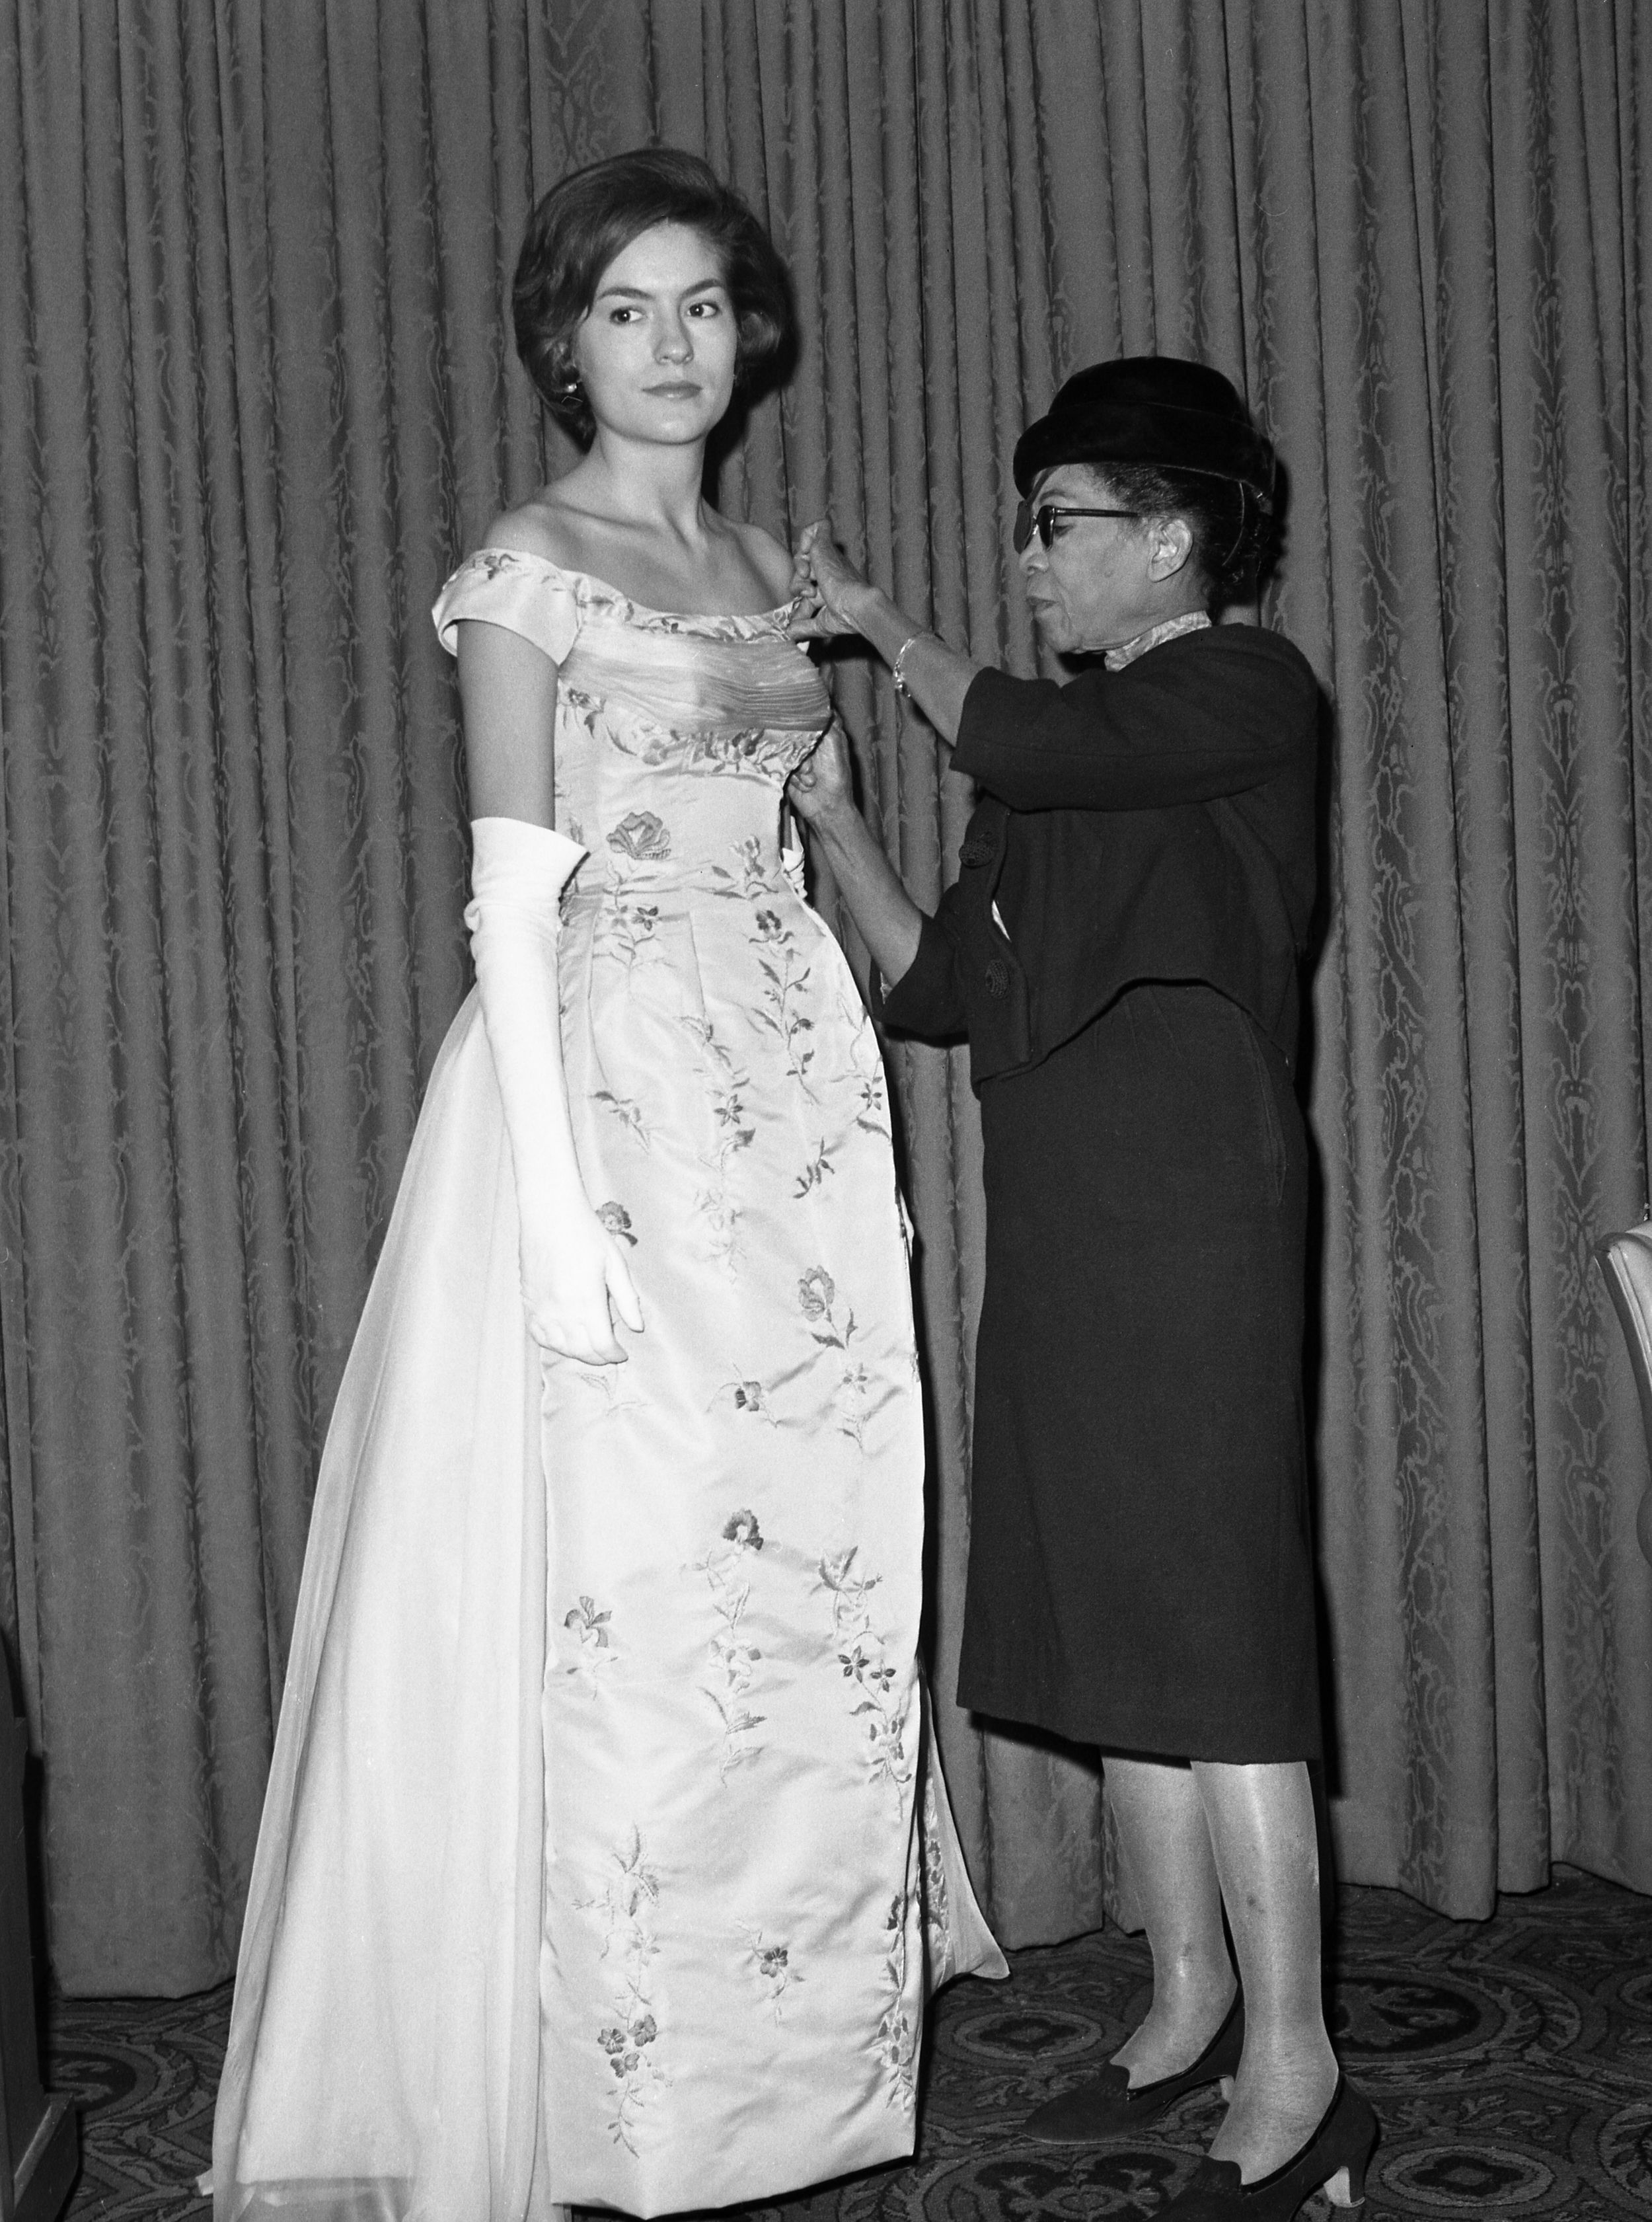 The untold story of the Black designer behind Jackie Kennedy's wedding dress